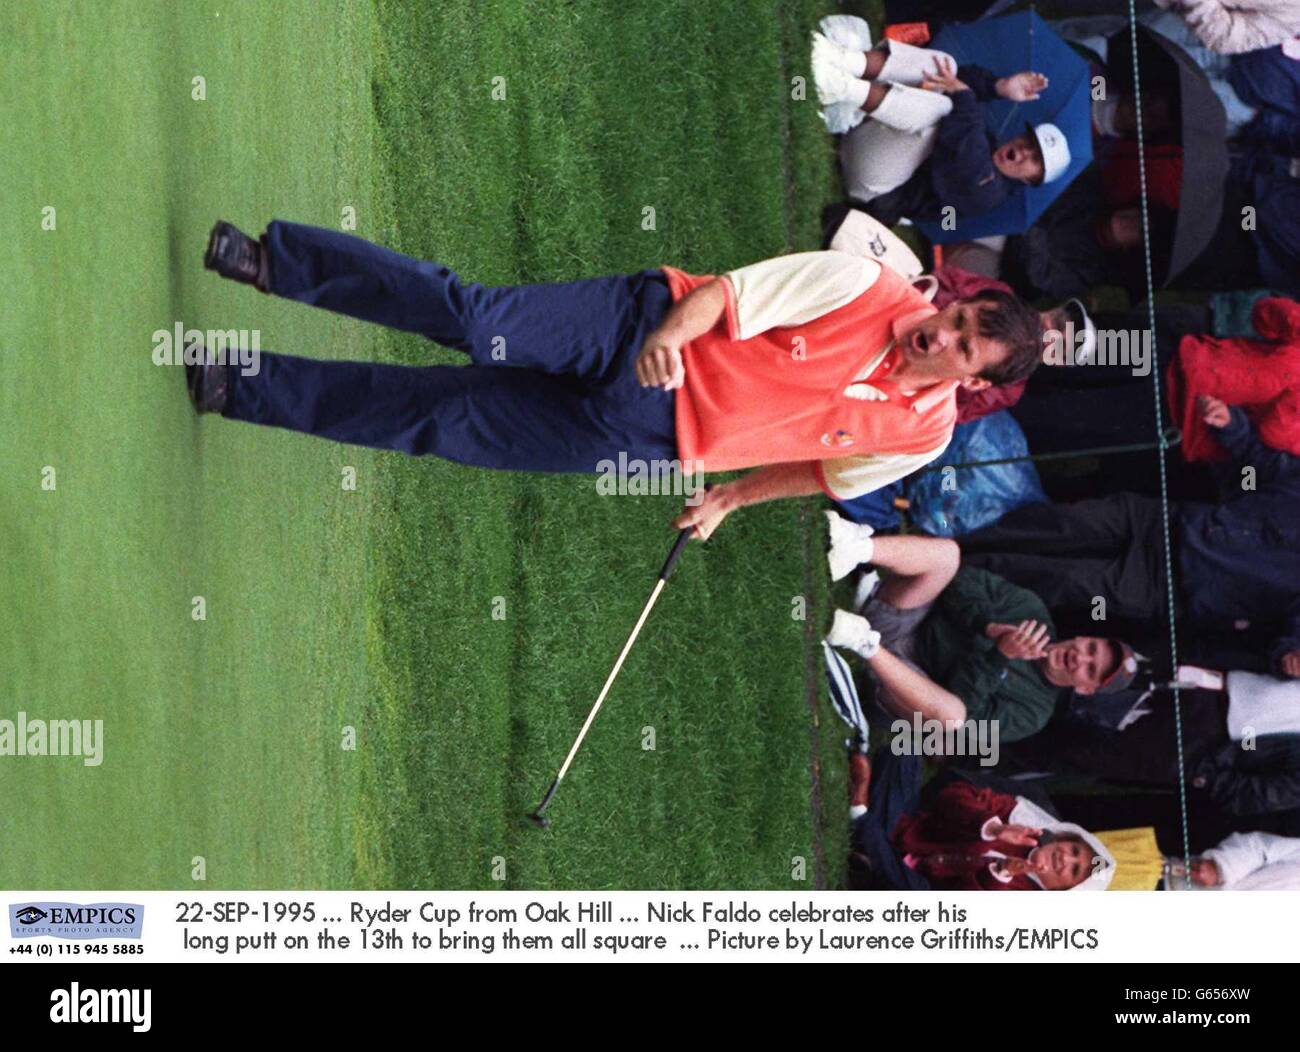 22-SEP-1995 ... Ryder Cup from Oak Hill ... Nick Faldo celebrates after his long putt on the 13th to bring them all square ... Picture by Laurence Griffiths/EMPICS Stock Photo